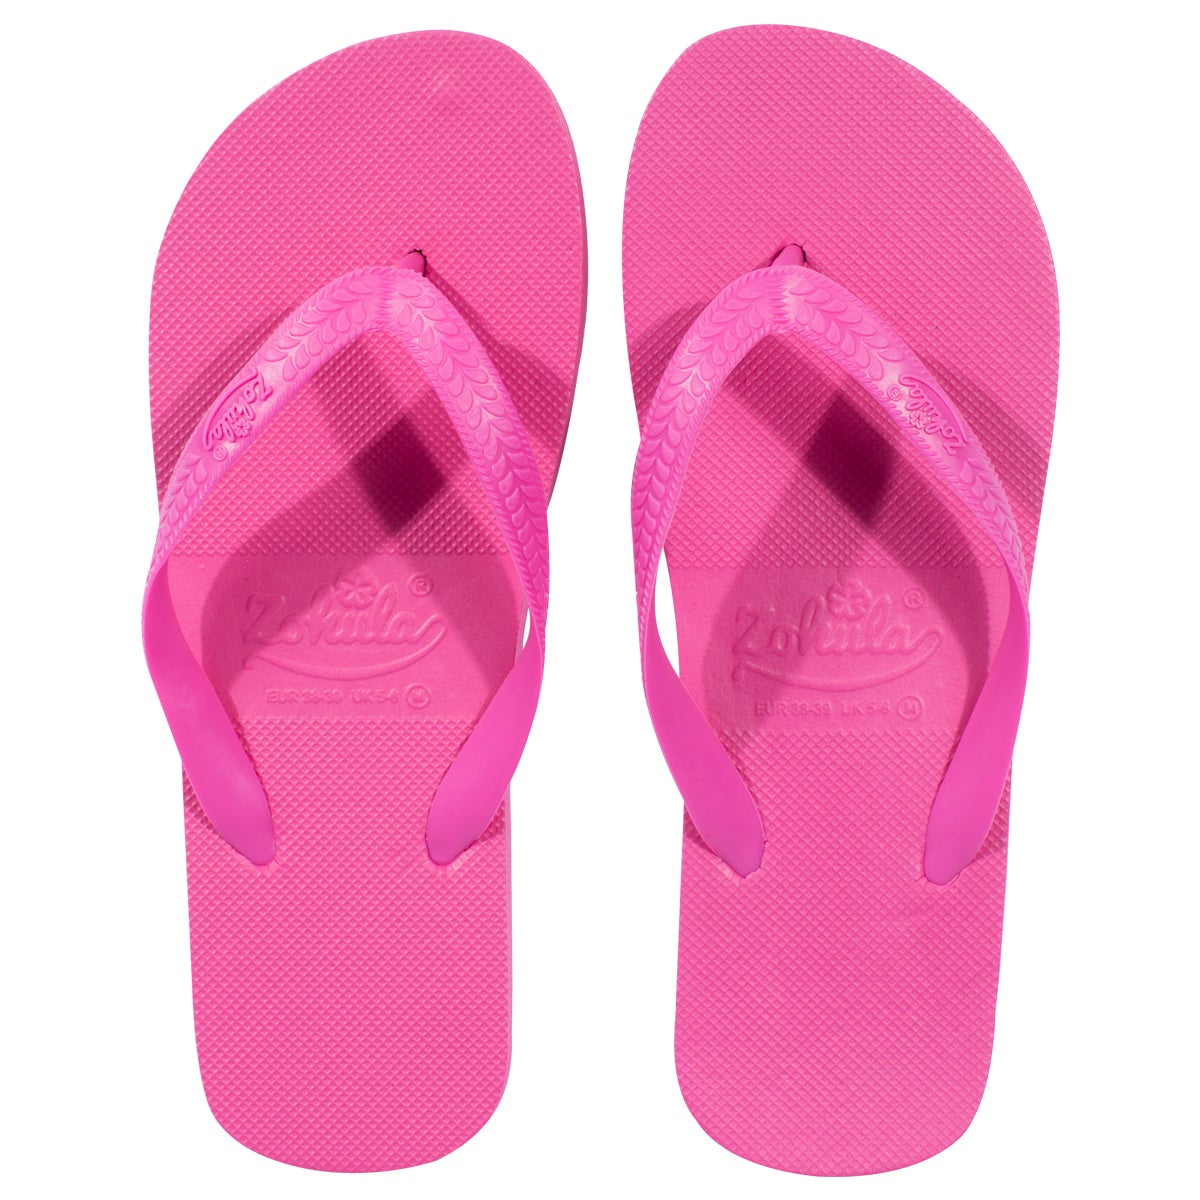 Bulk Buy Wholesale 10-100 Pairs From Only £1.49 pair lot Zohula Flip Flops 